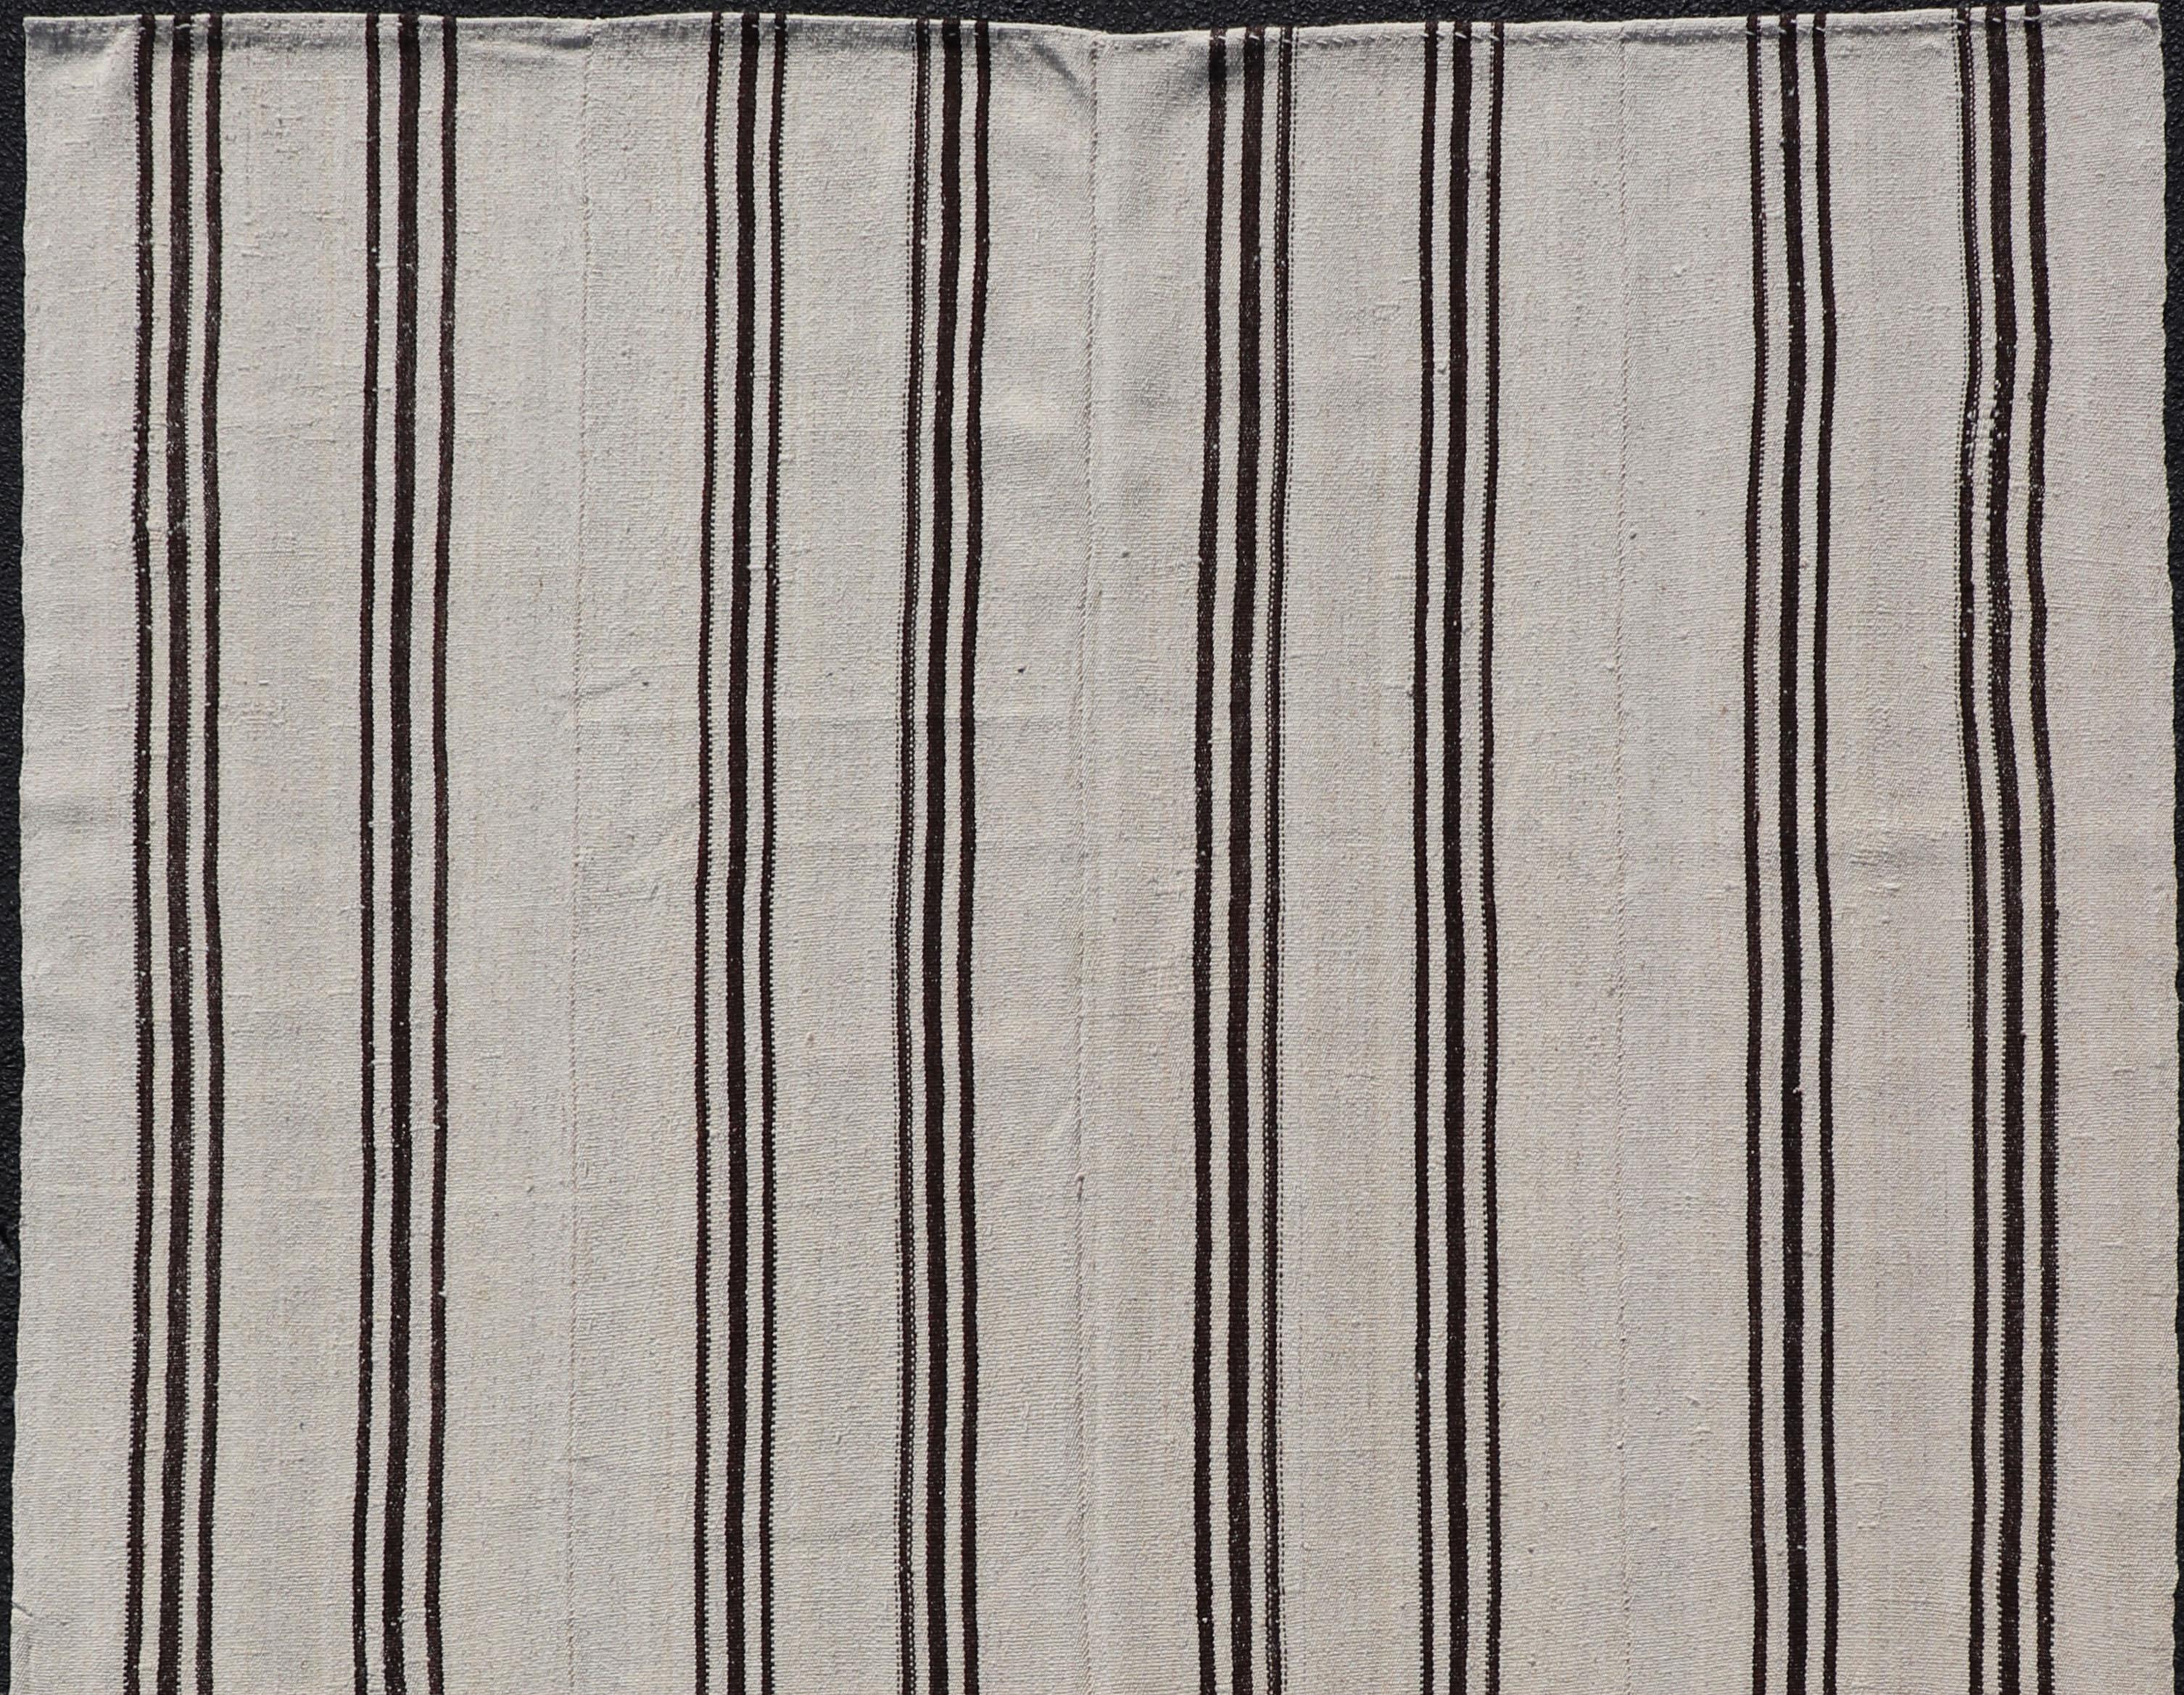 Flat-weave Kilim vintage rug from Turkey with vertical stripes in brown and cream. Keivan Woven Arts Rug TU-NED-1021-3, country of origin / type: Turkey / Kilim, circa 1950

Woven during the mid-20th century in Turkey, this Kilim is decorated with